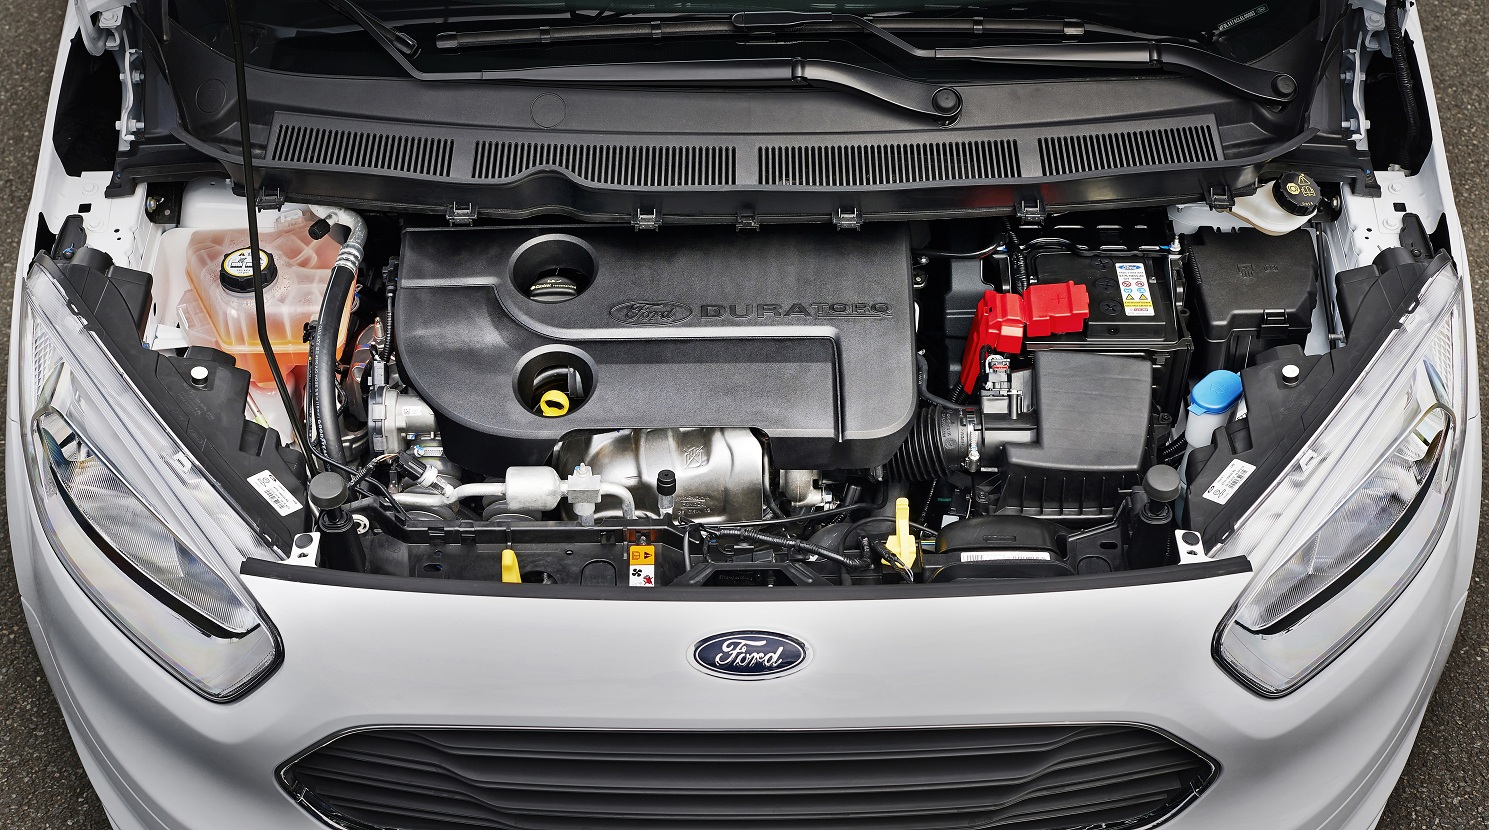 Ford Produces 3 Millionth Small Diesel Engine in Europe